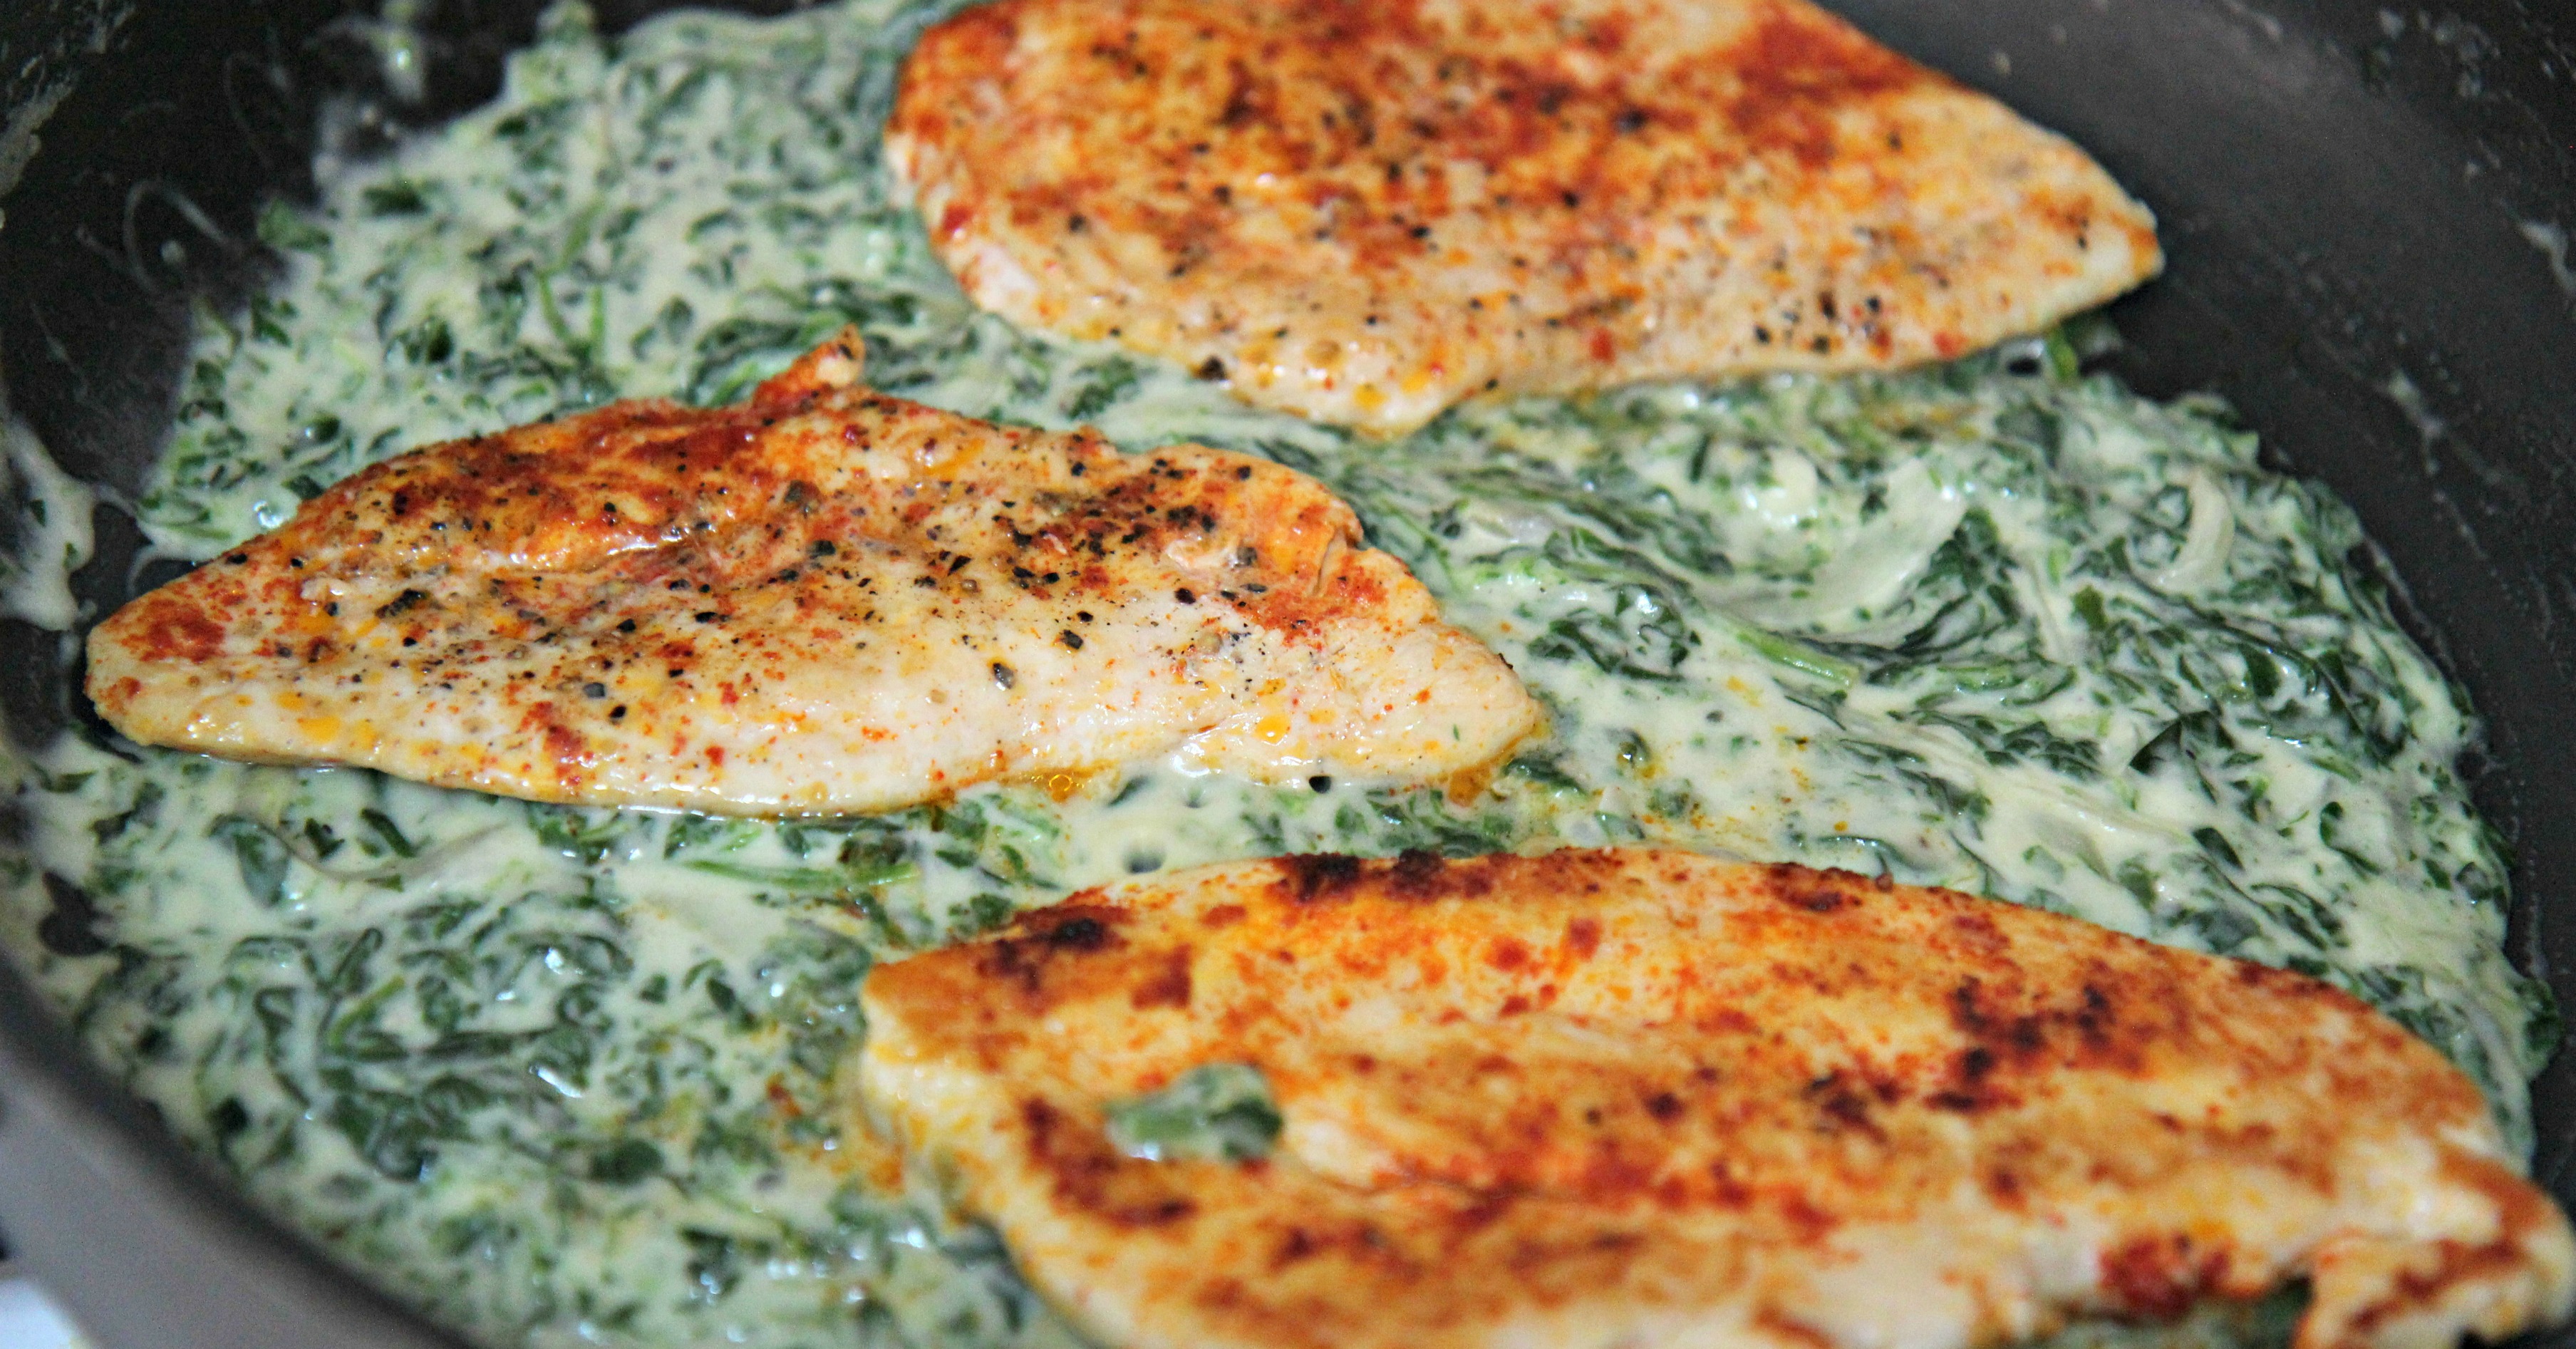 Perfectly seasoned chicken breast cooked in a creamy spinach sauce